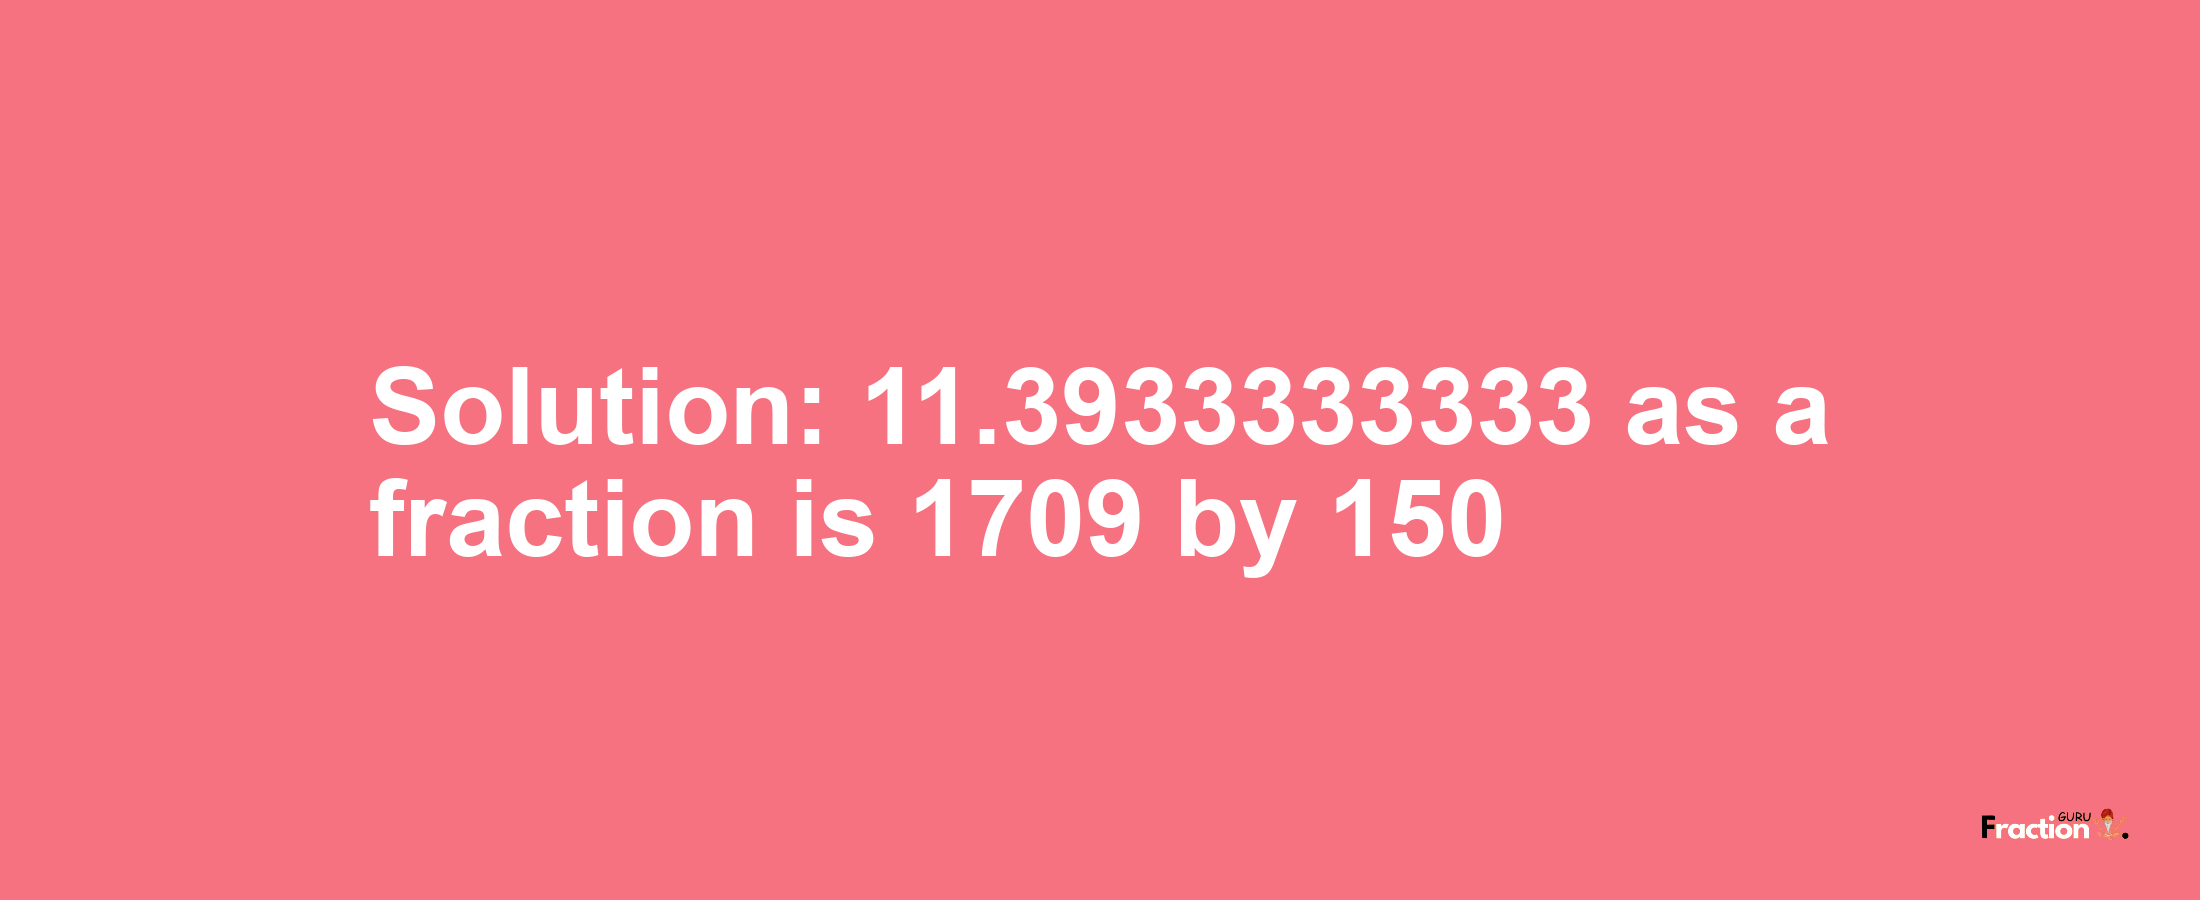 Solution:11.3933333333 as a fraction is 1709/150